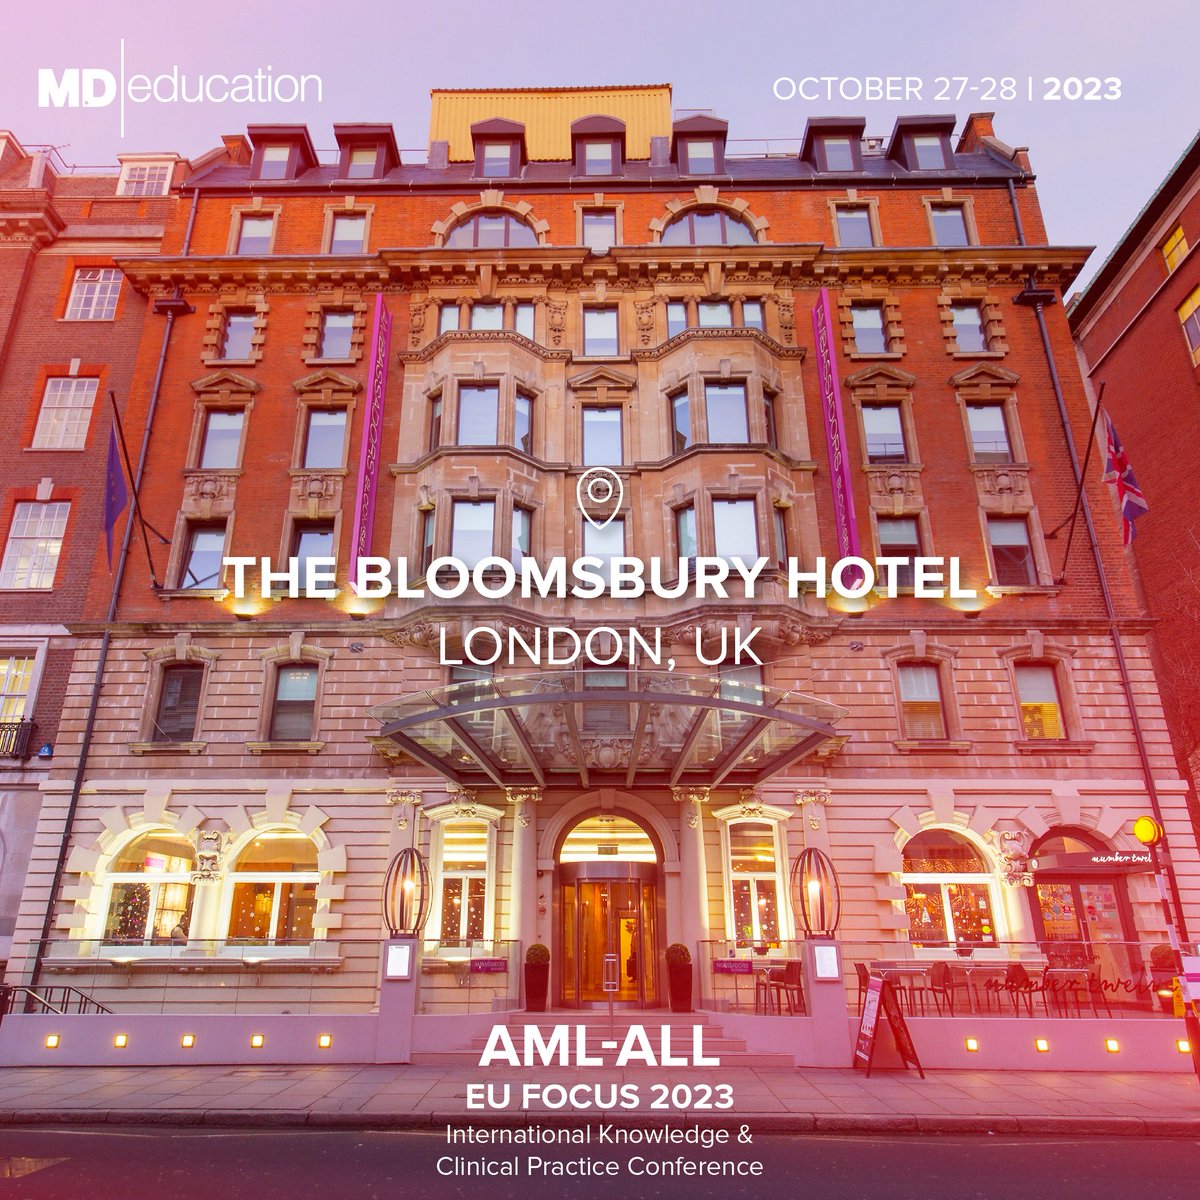 🏛️ The Bloomsbury Hotel awaits! Hosting the AML-ALL EU Focus 2023, 27-28 Oct. 

Dive into AML & ALL insights and relish the luxury of this iconic venue. Discover London's charm while updating your knowledge! 
🔗 Book now: aml-alleu2023.md-education.com

#AMLALLEUFocus2023 #TheBloomsbury